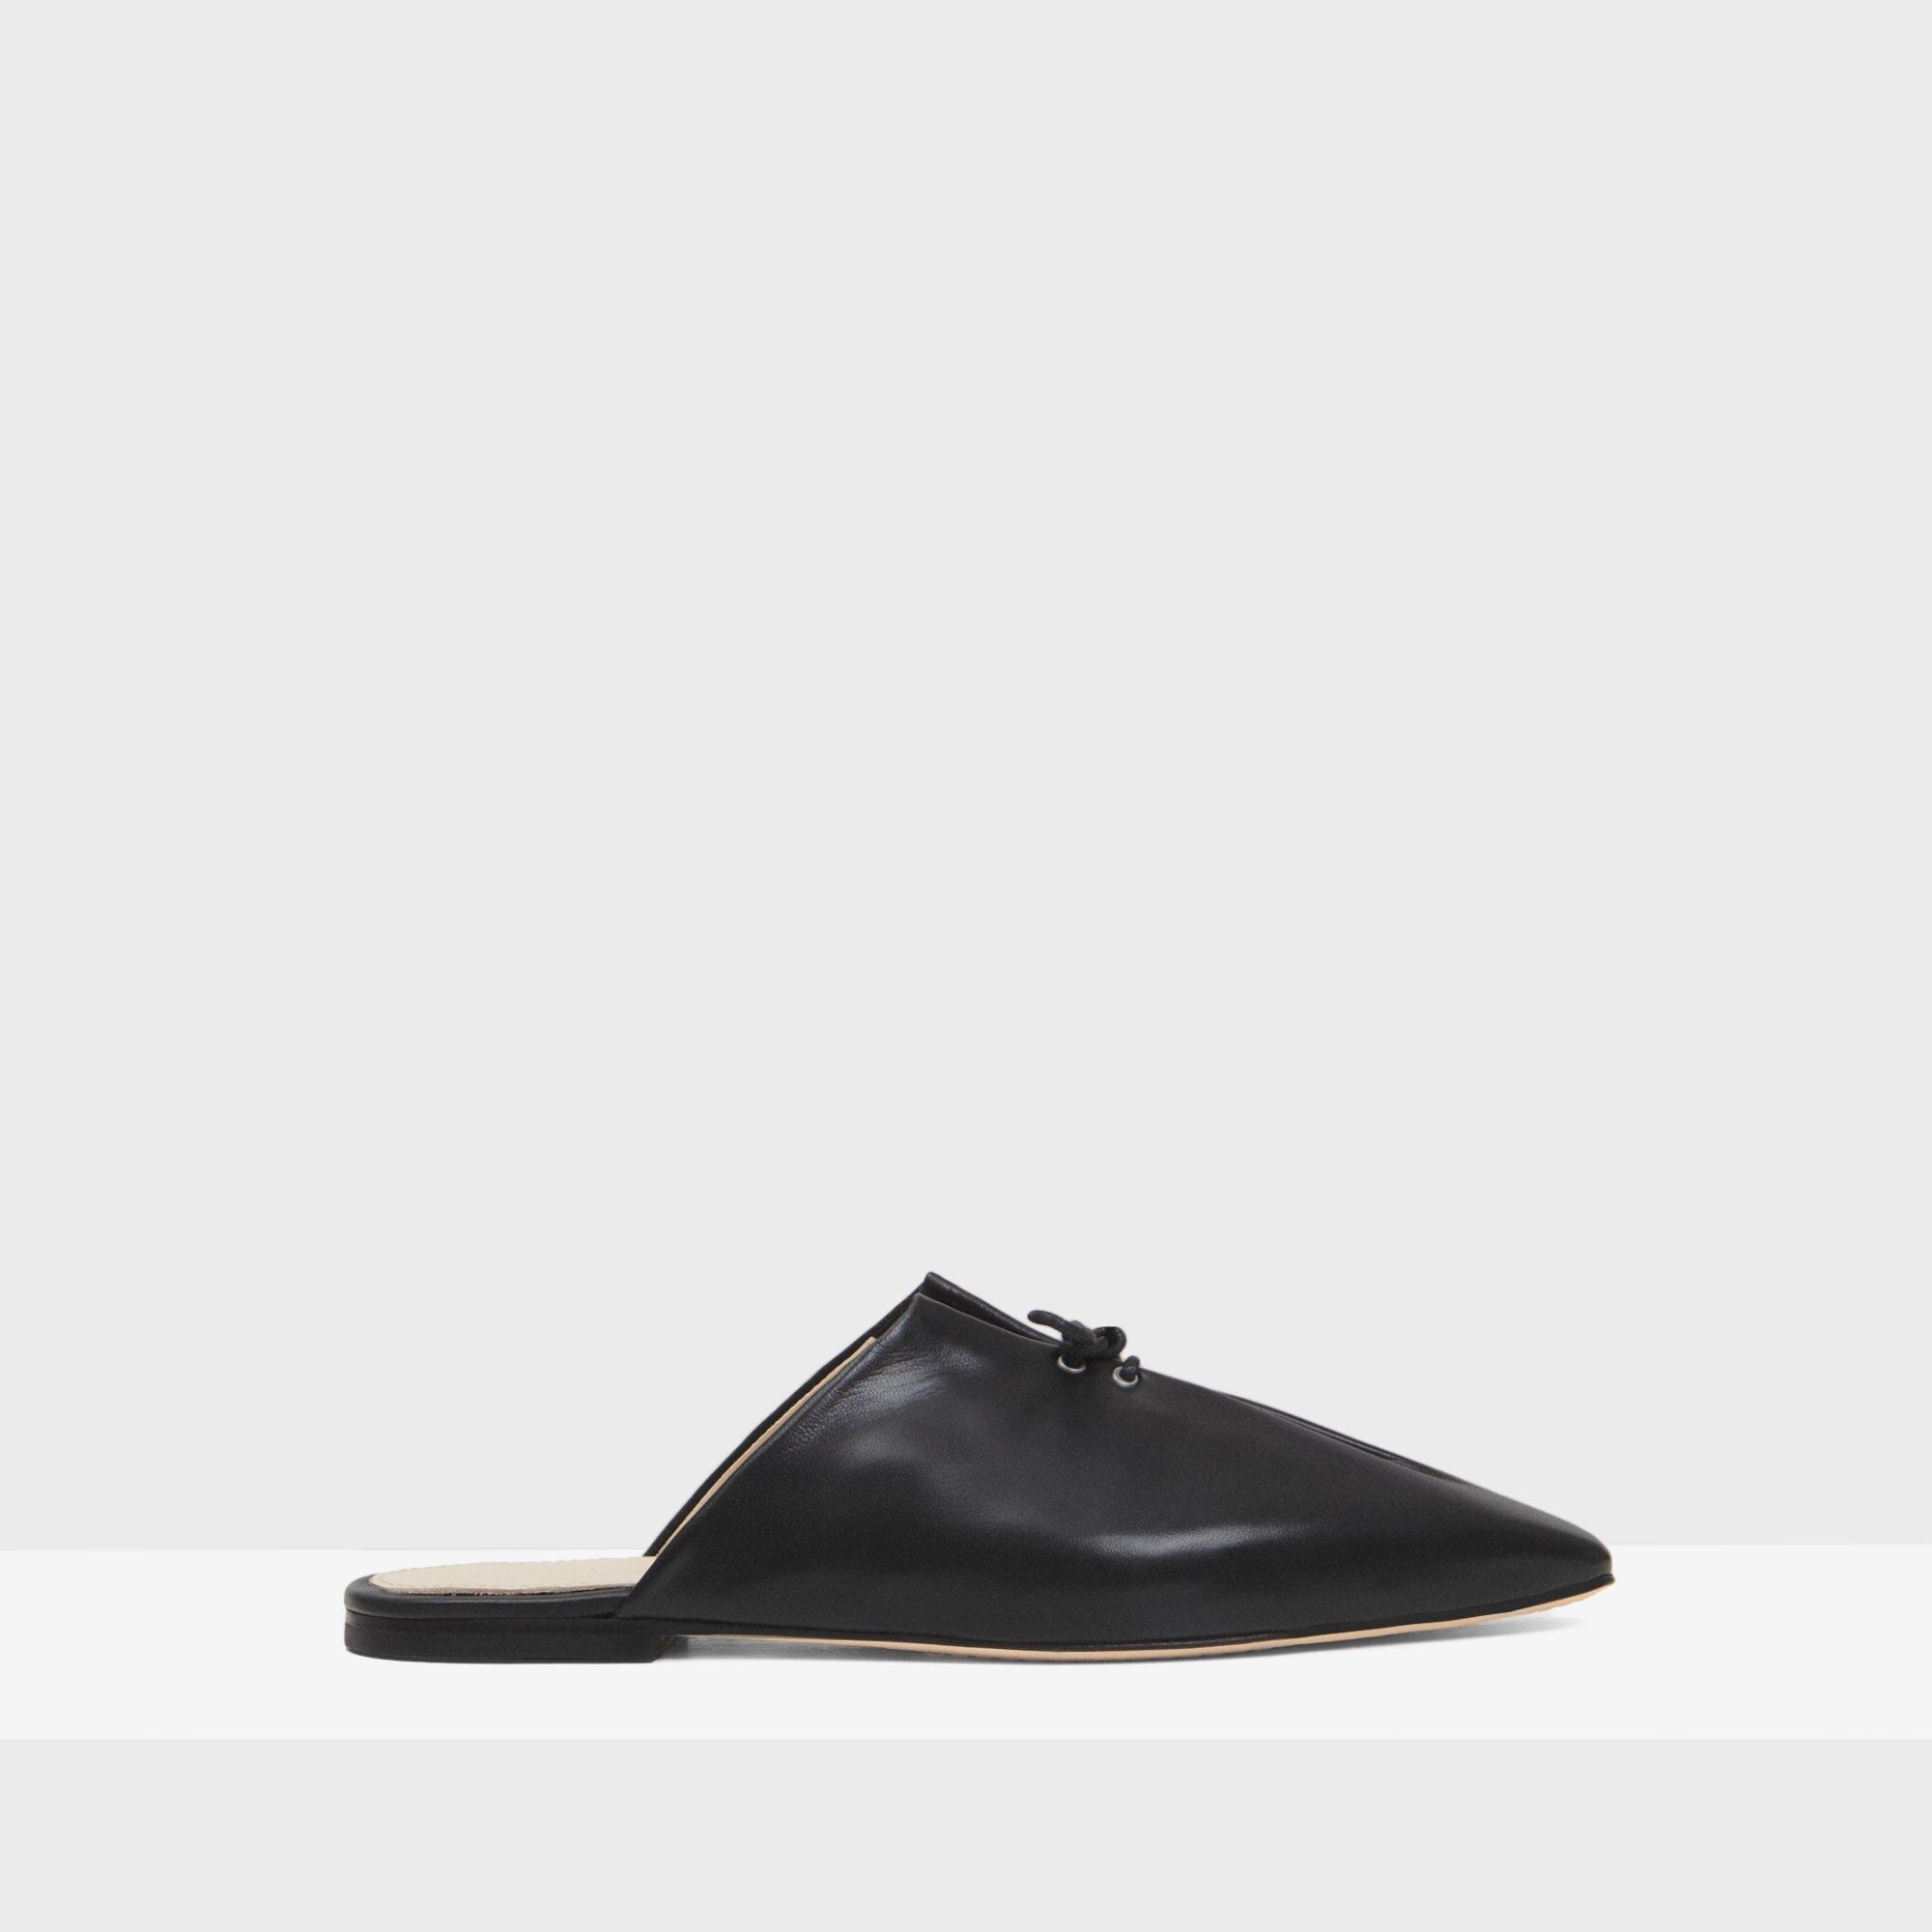 Women's Accessories & Shoes | Theory Official Site